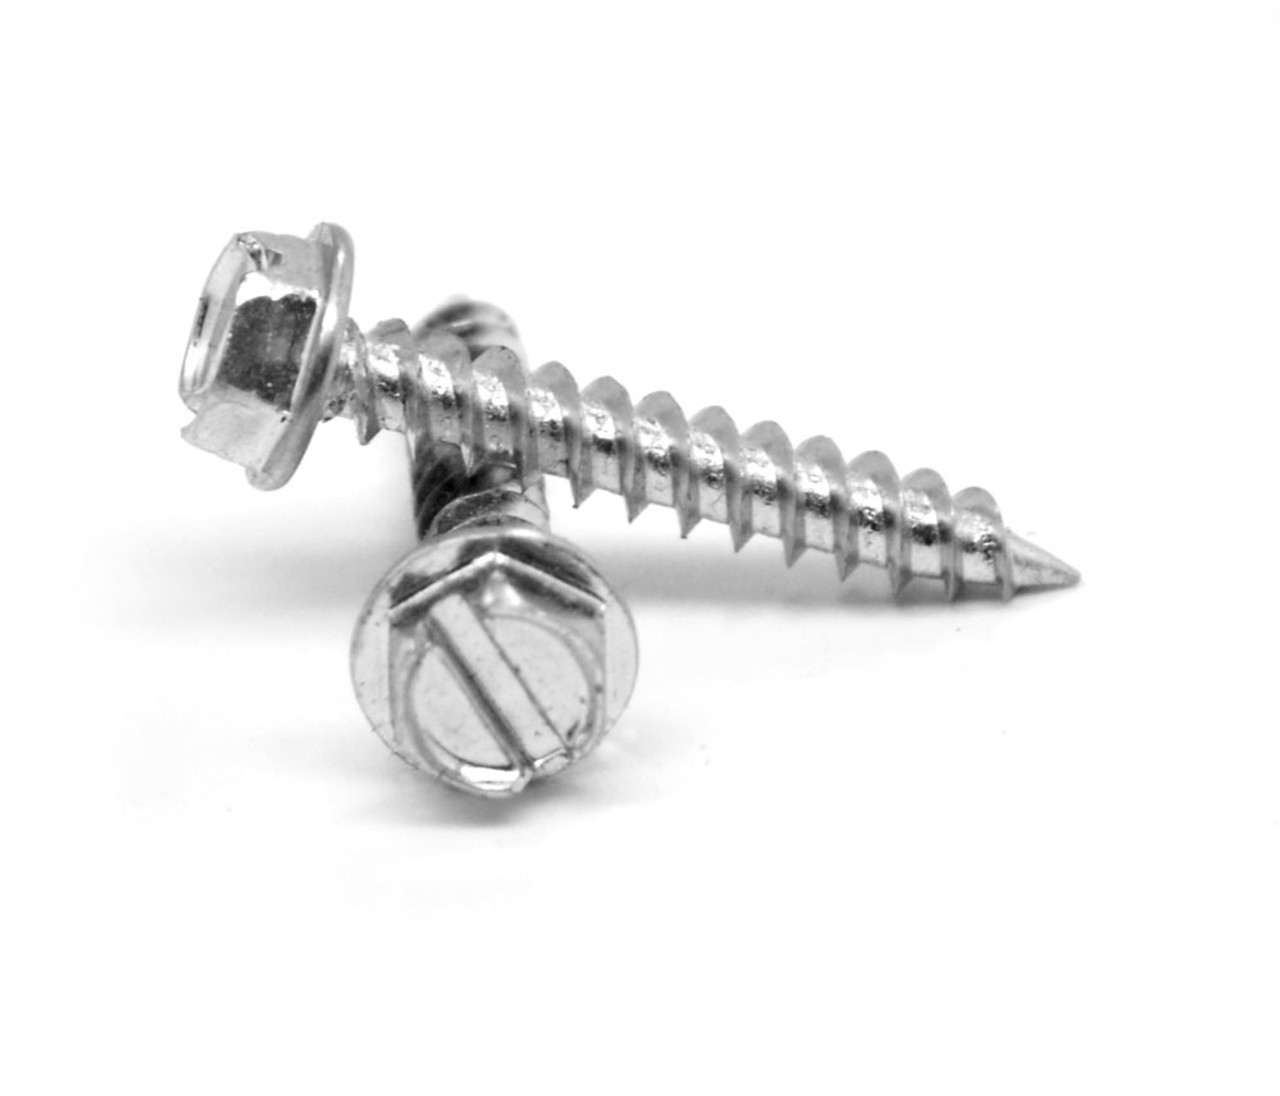 #8-15 x 1/2" (FT) 1/4" AF Self-Piercing Sheet Metal Screw Slotted Hex Washer Head Stainless Steel 18-8